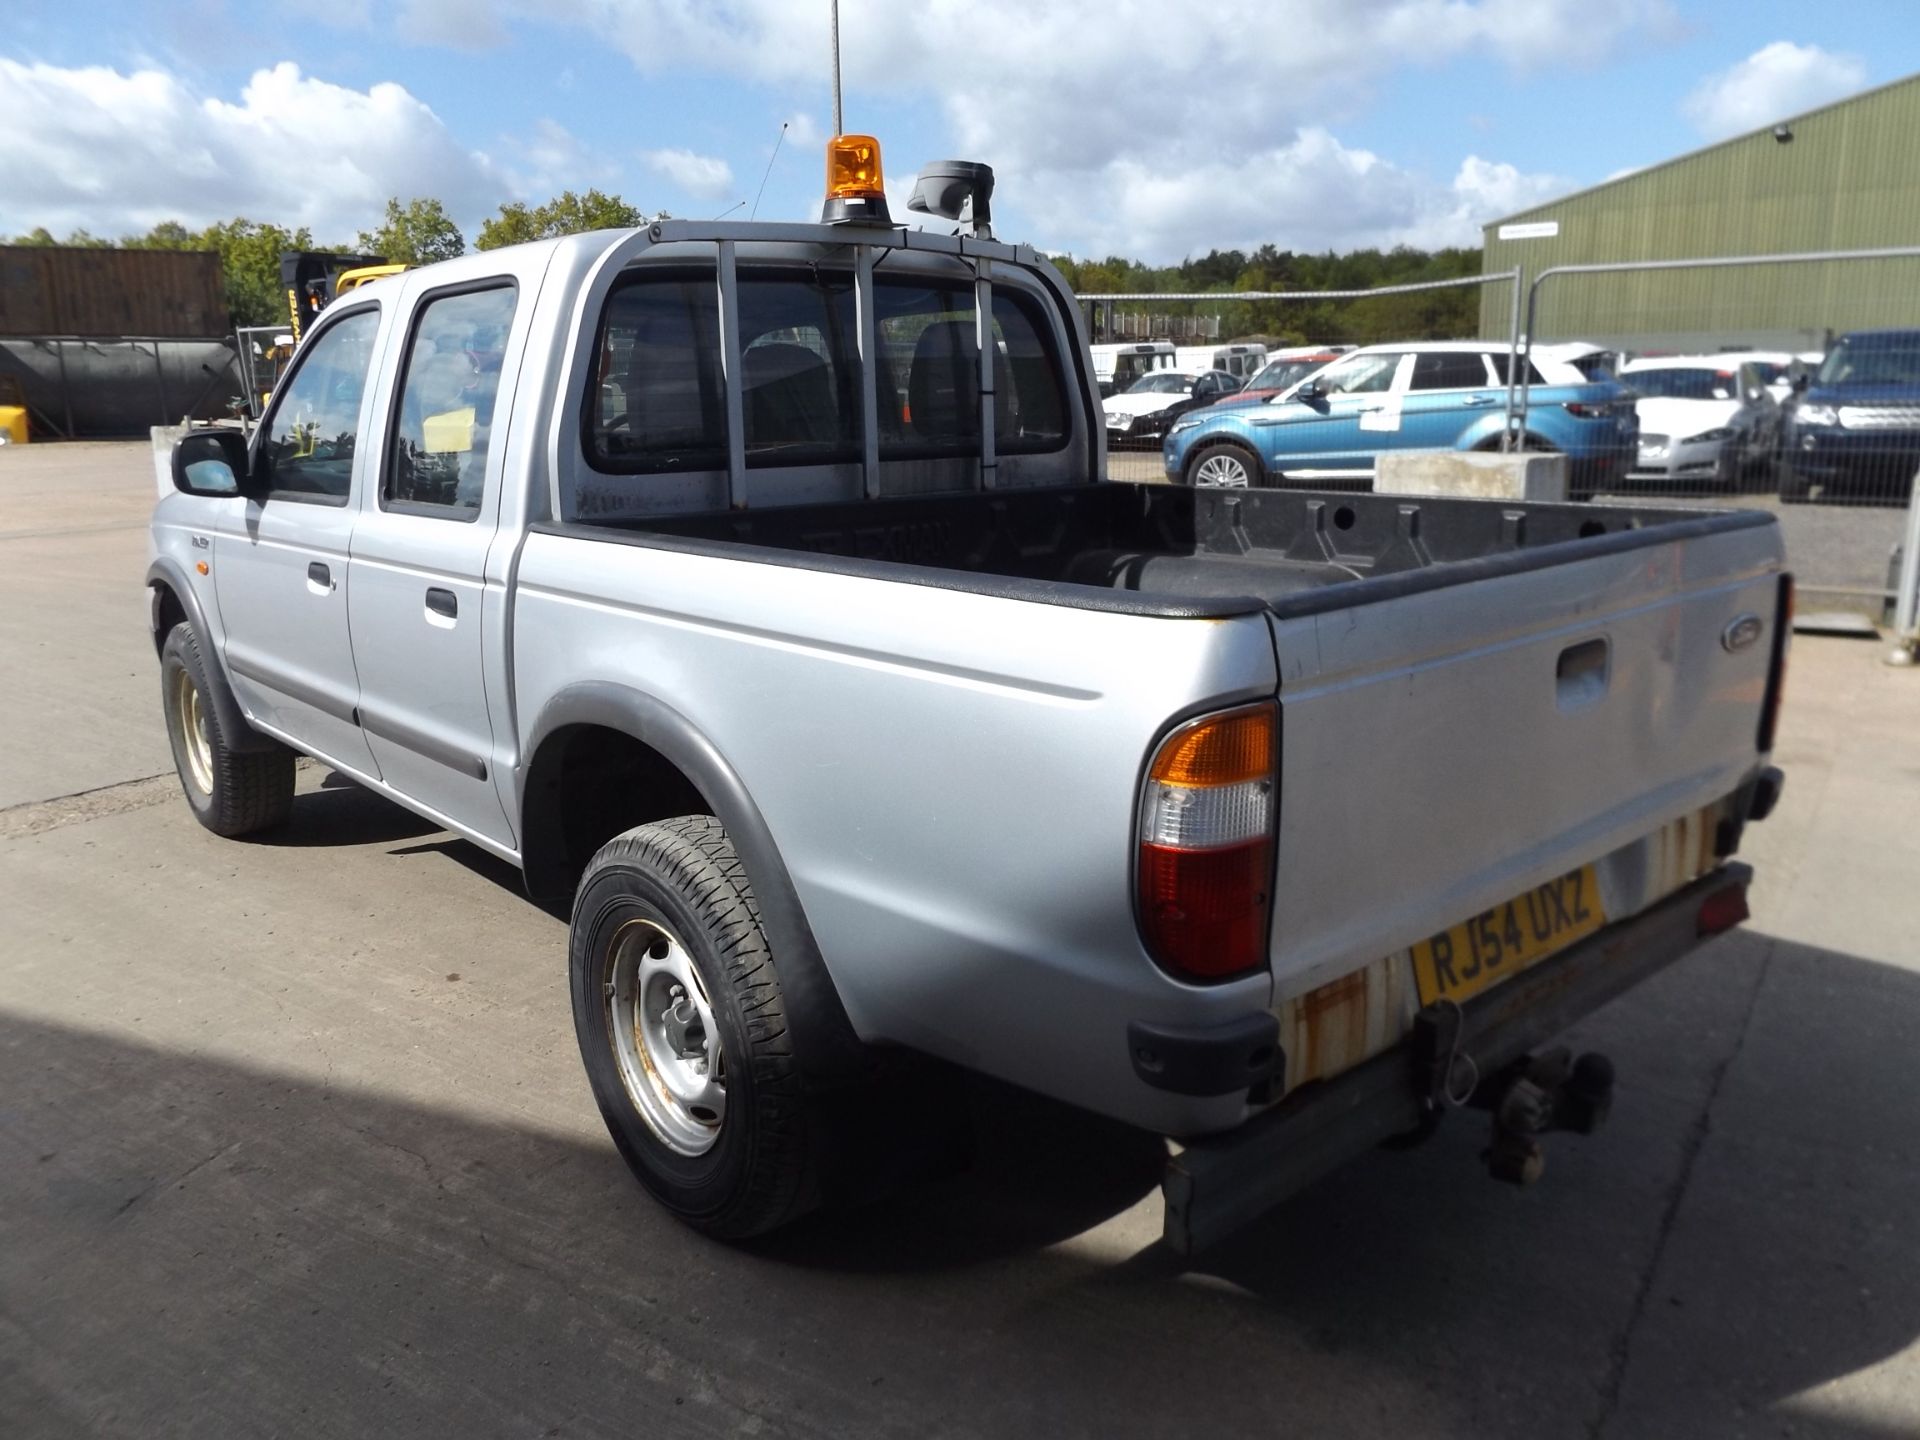 Ford Ranger Double cab pick up - Image 6 of 15